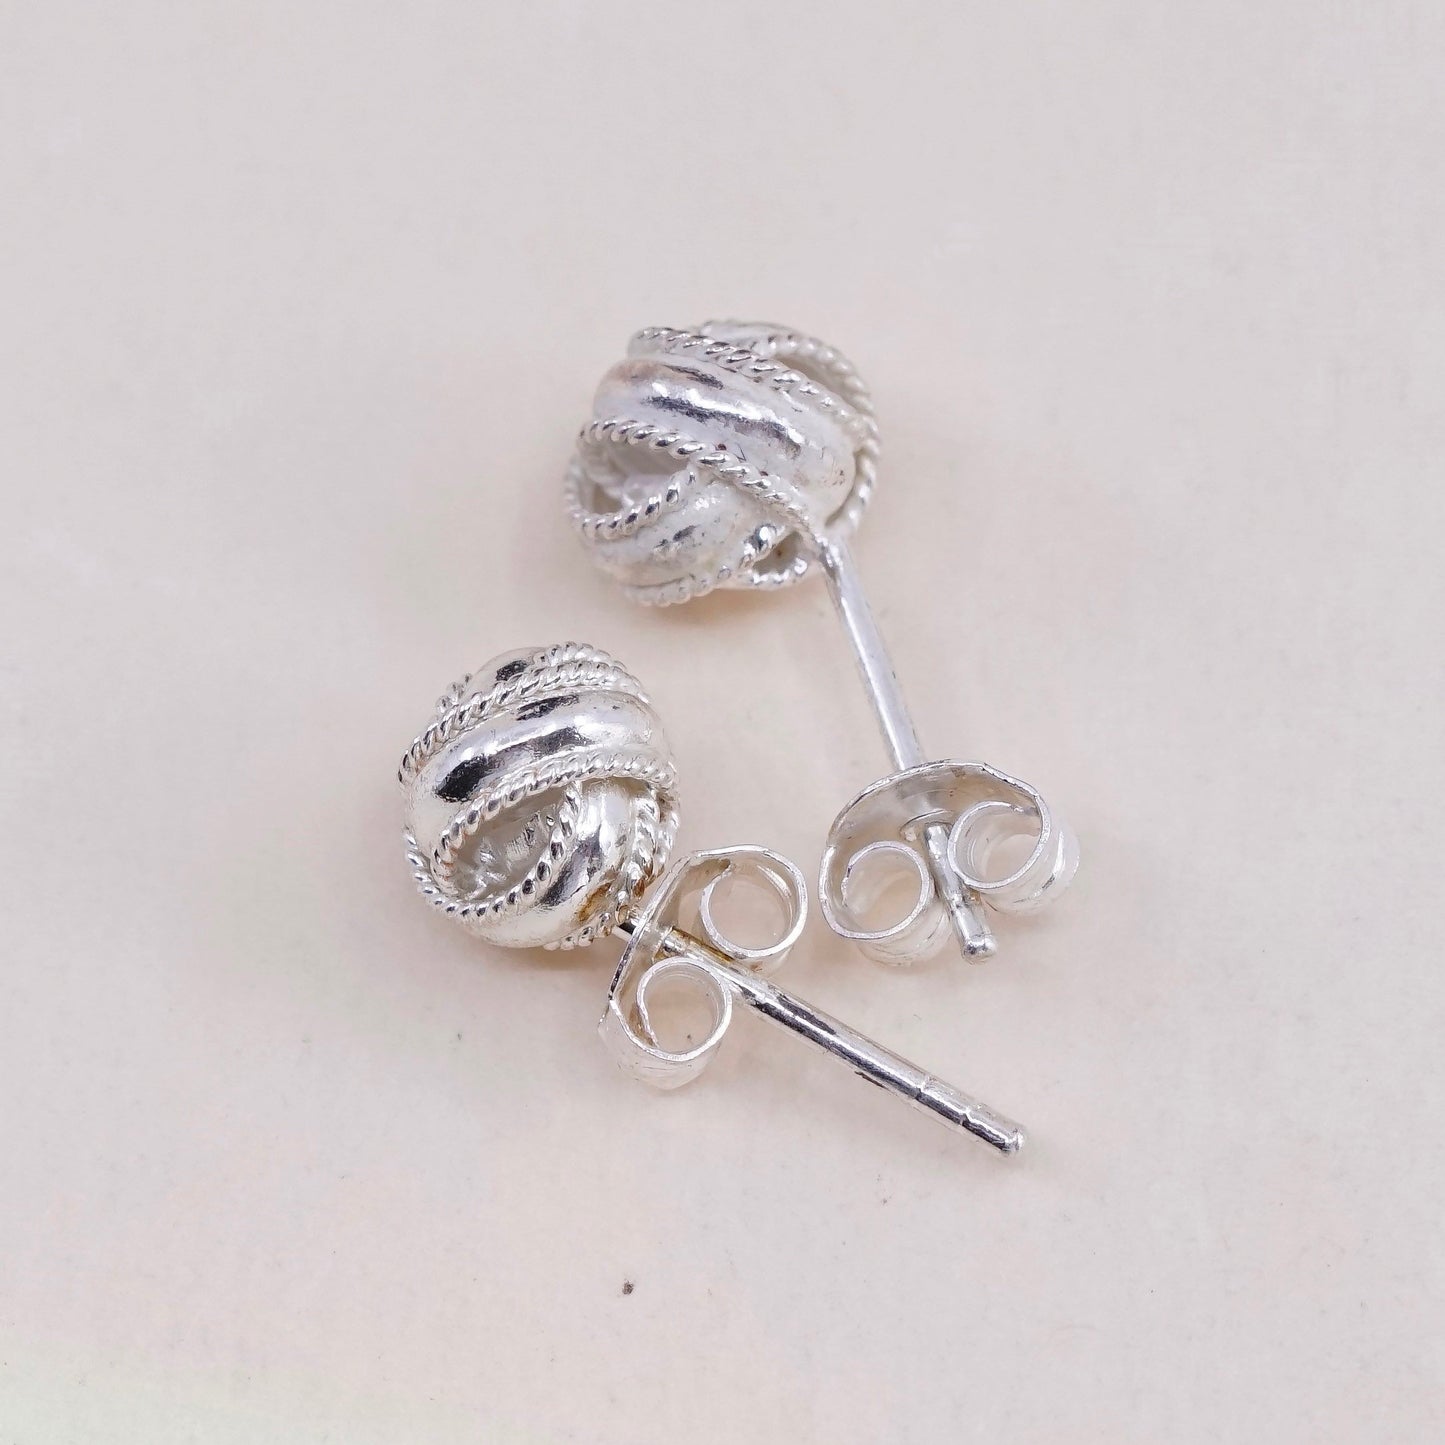 0.25”, Vintage Sterling silver handmade earrings, Entwined cable studs